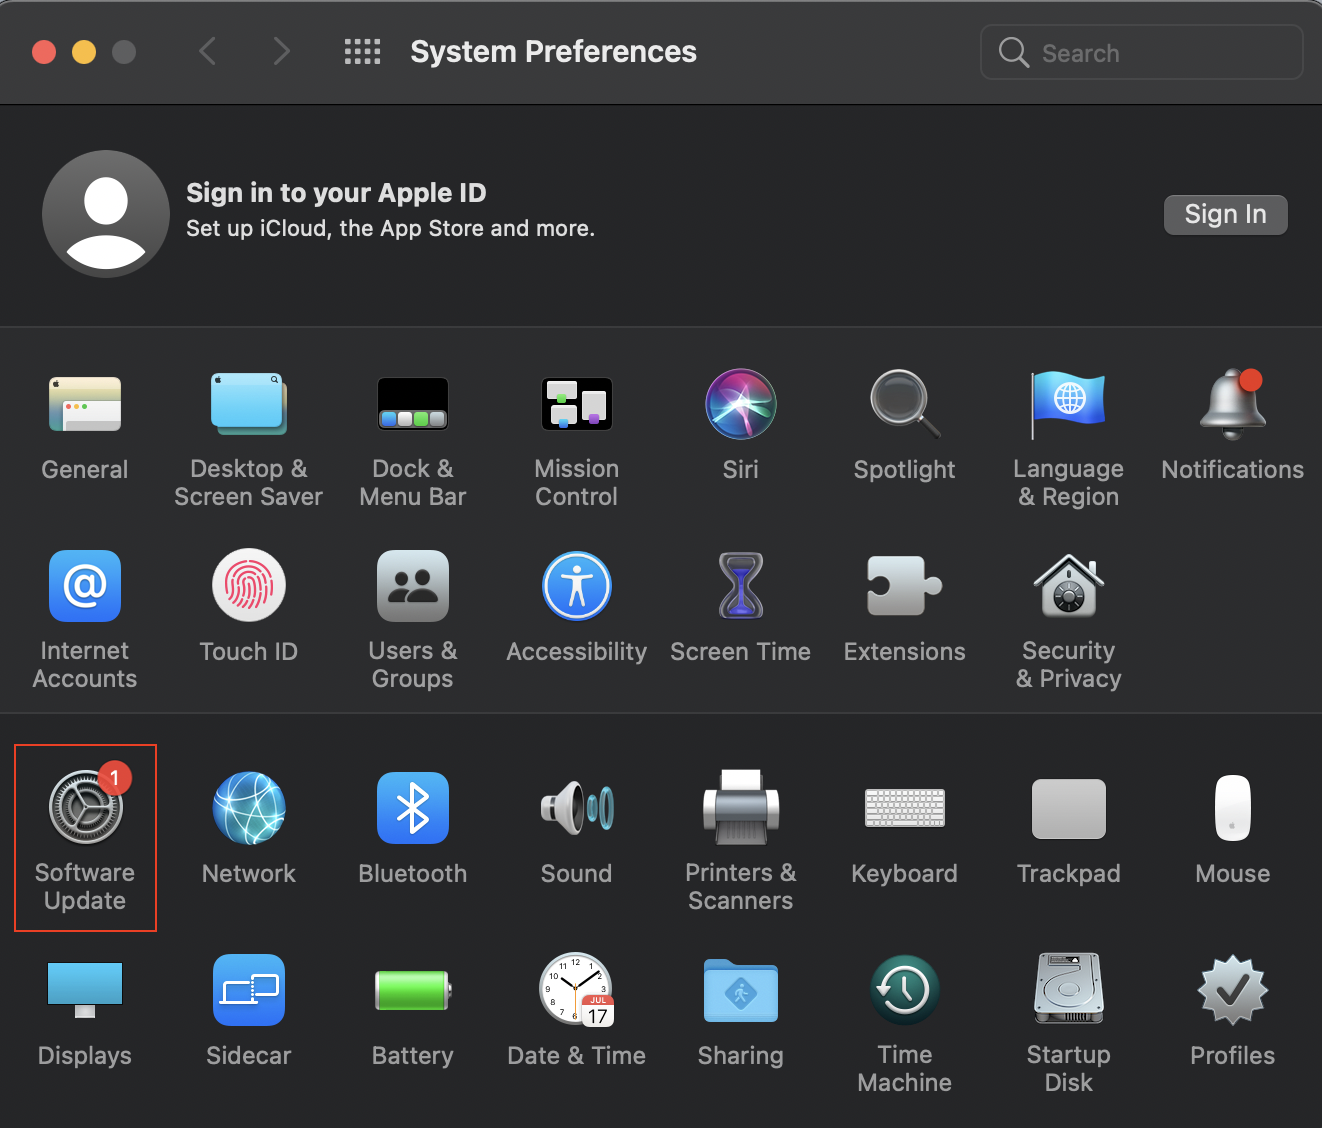 Software update location under System Preferences on macOS 